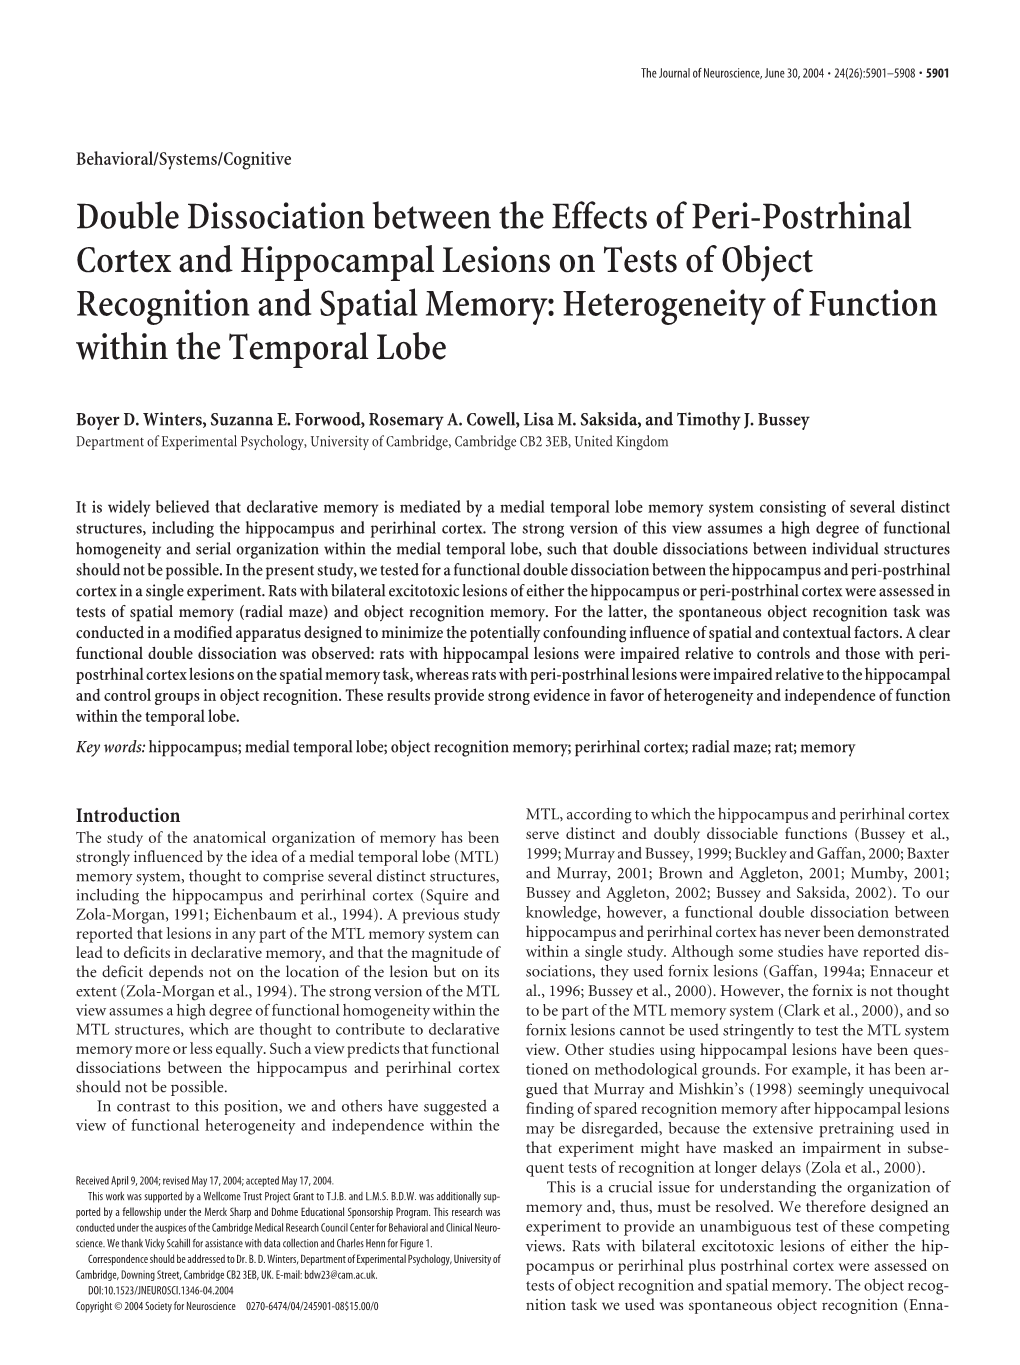 Double Dissociation Between the Effects of Peri-Postrhinal Cortex and Hippocampal Lesions on Tests of Object Recognition And